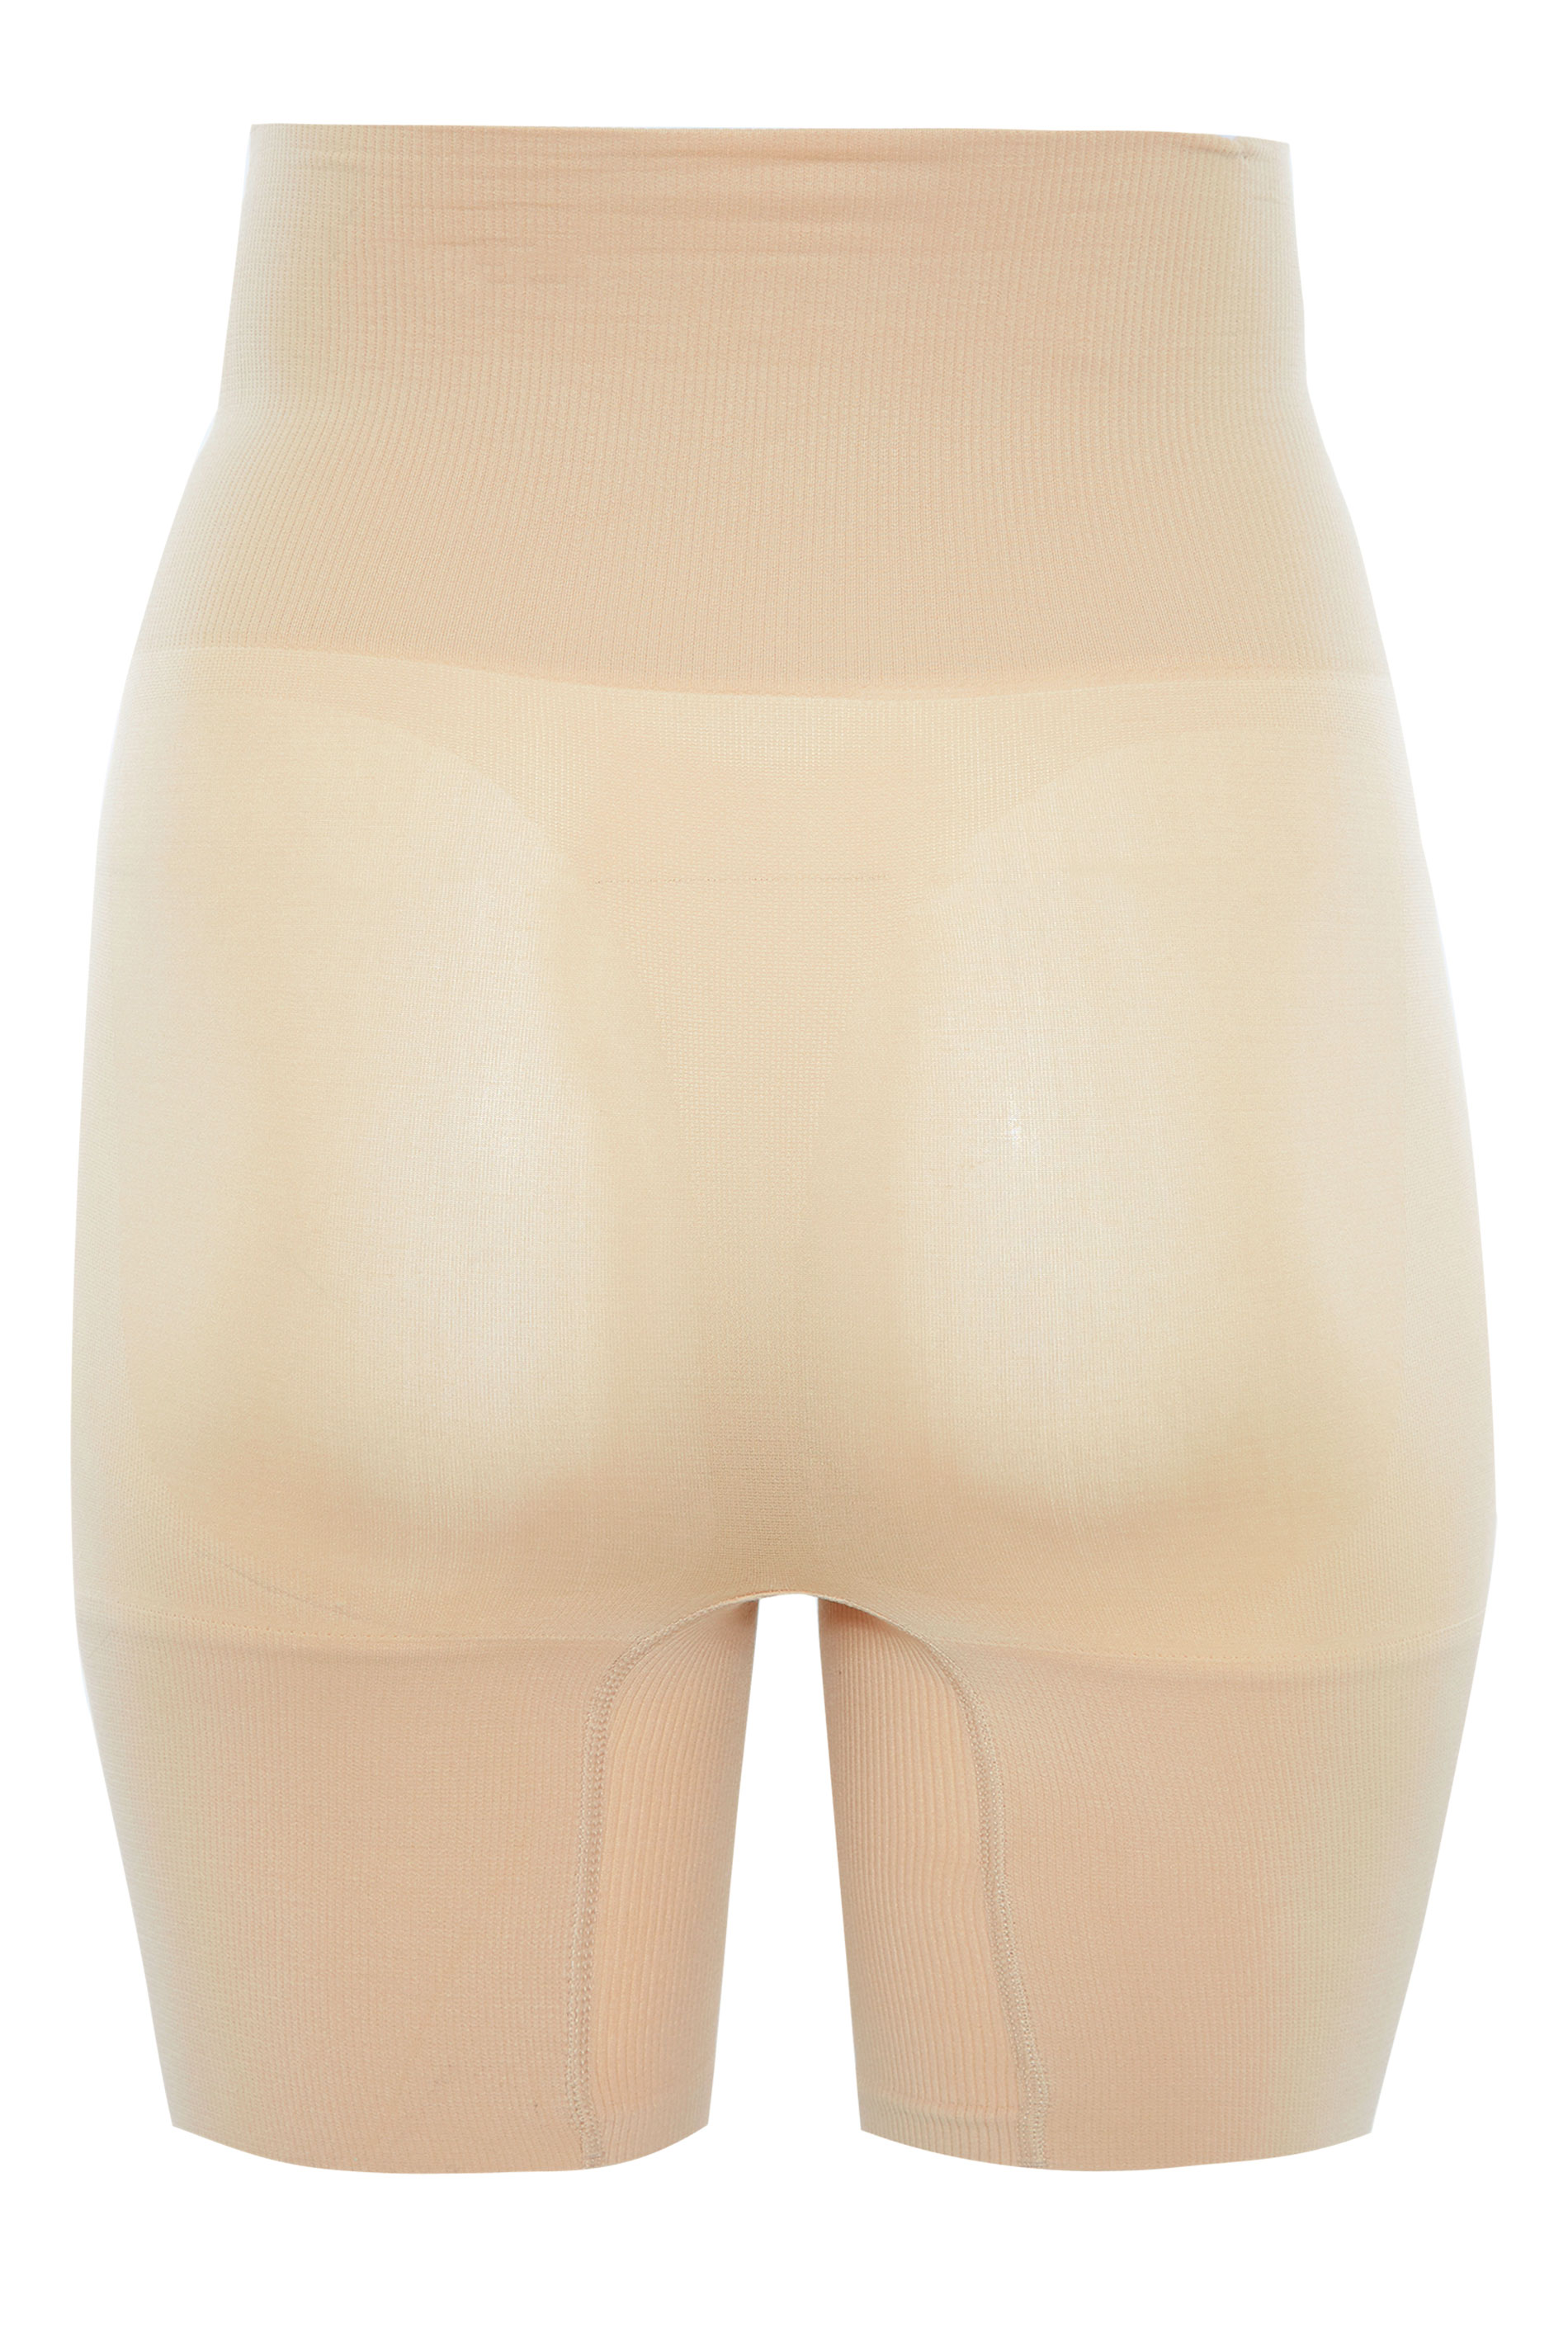 Plus Size Nude Seamless Control High Waisted Short